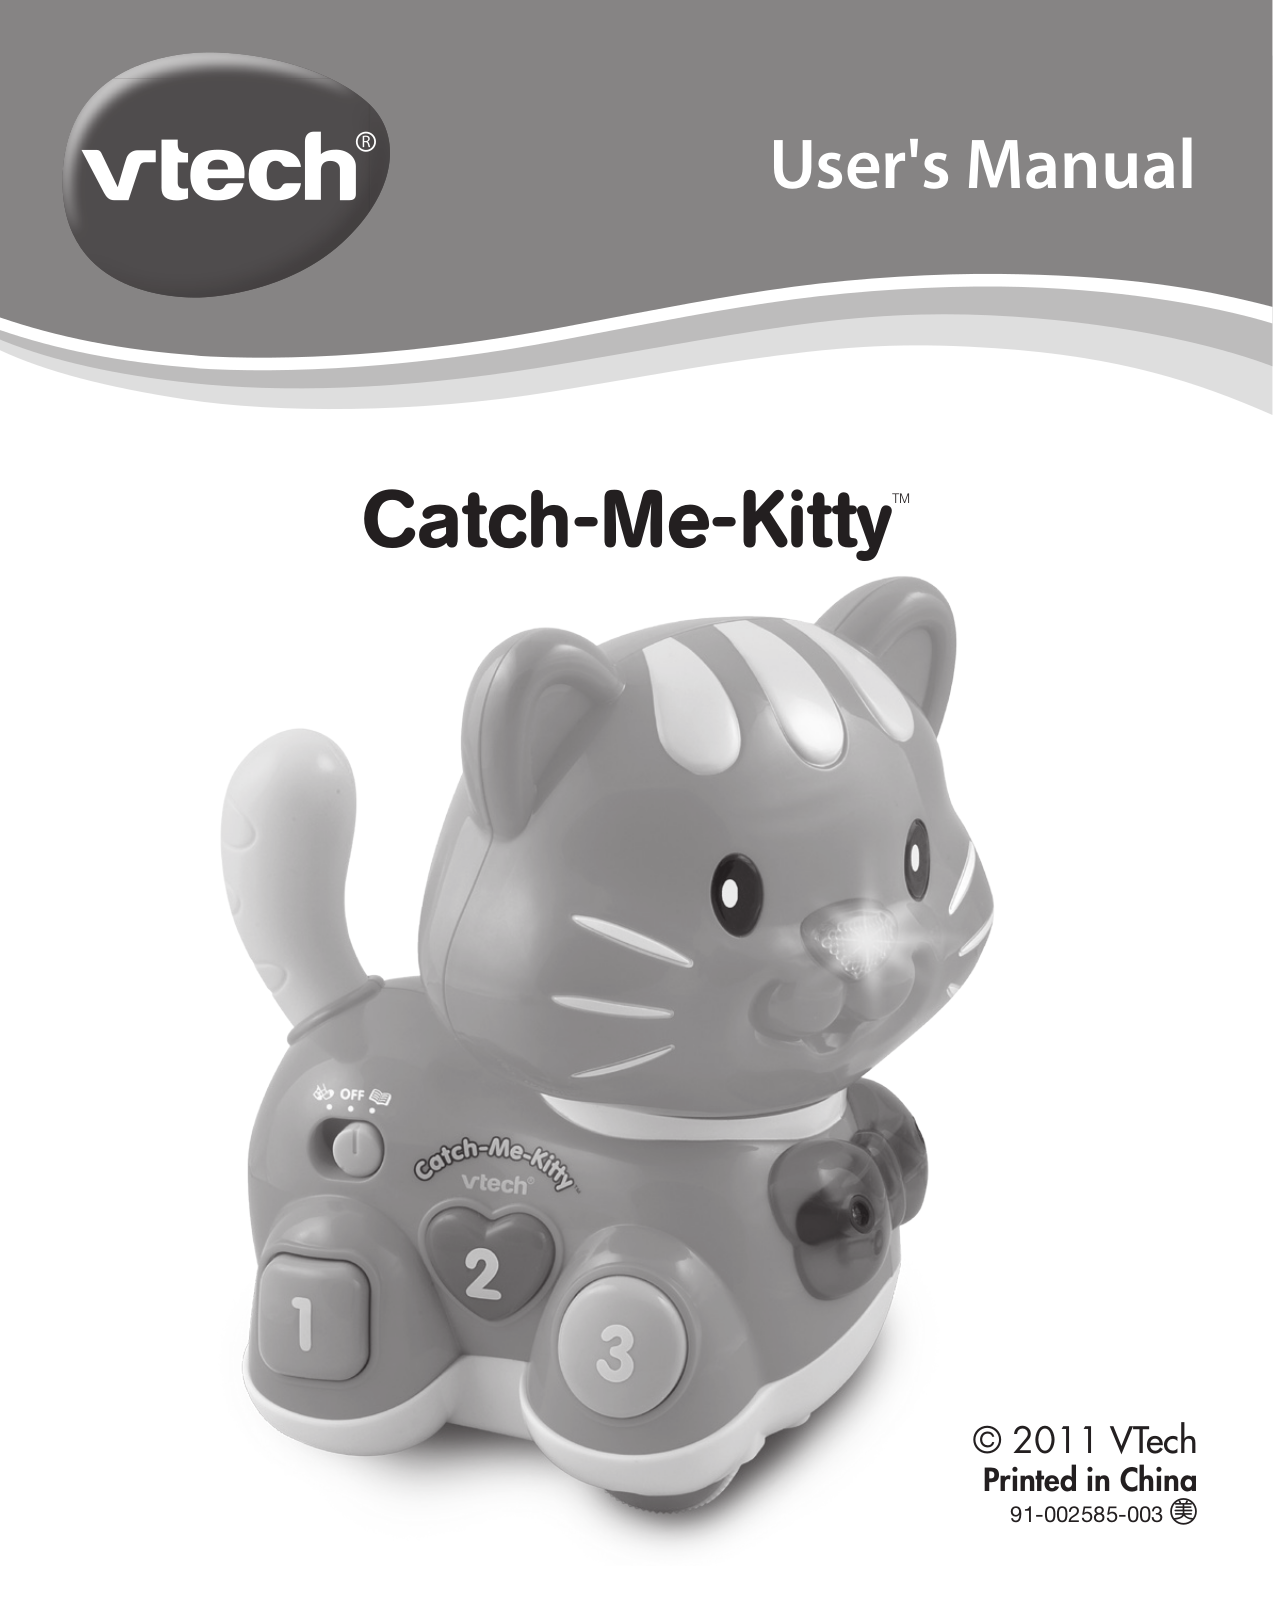 VTech Catch Me Kitty, Catch Me Kitty Pink Owner's Manual